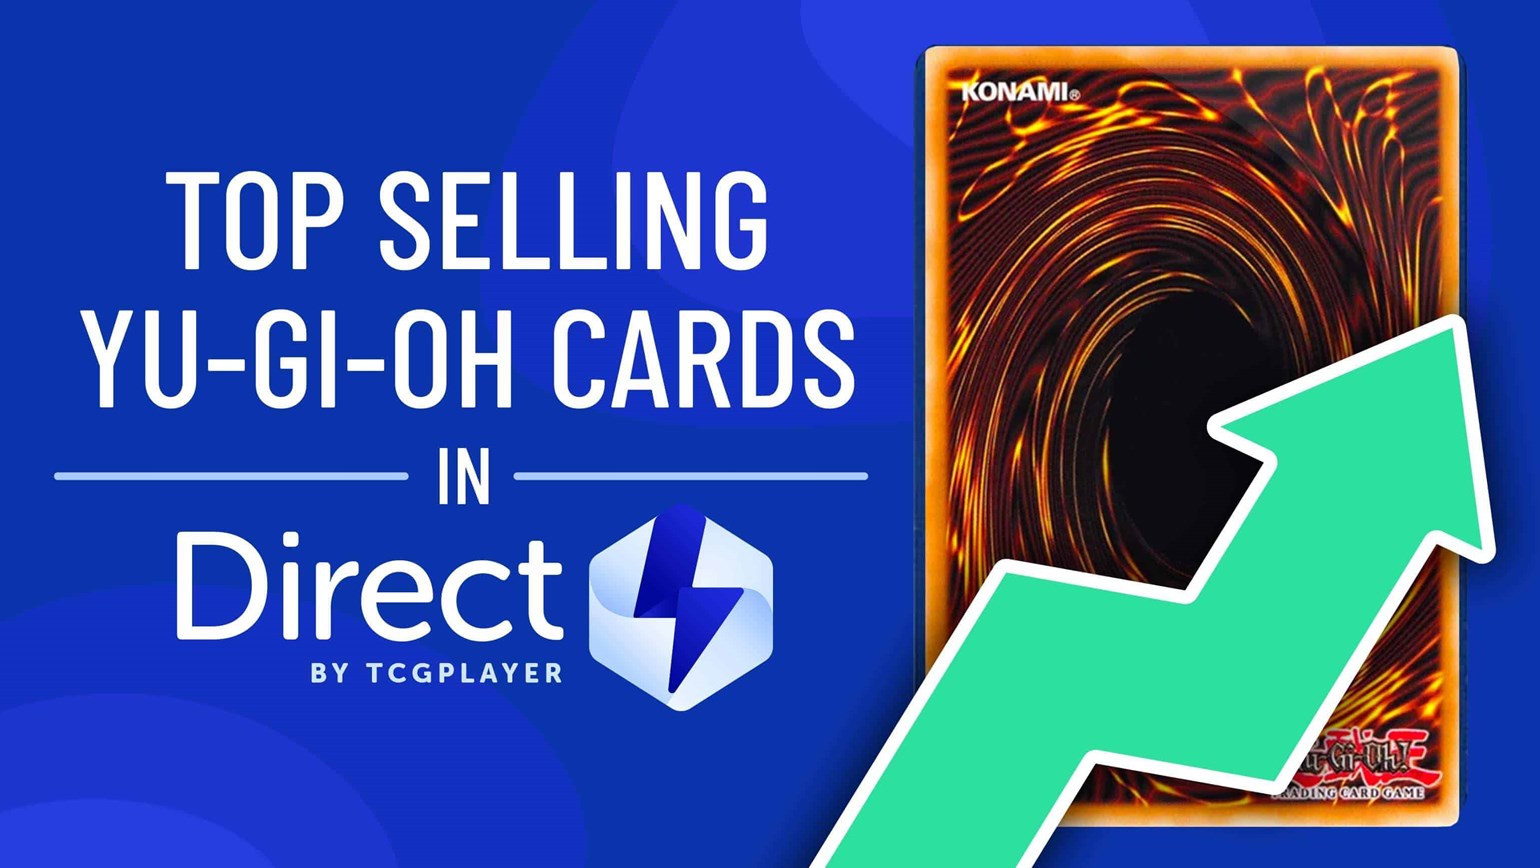 October Top Selling Yu-Gi-Oh! Cards in Direct by TCGplayer